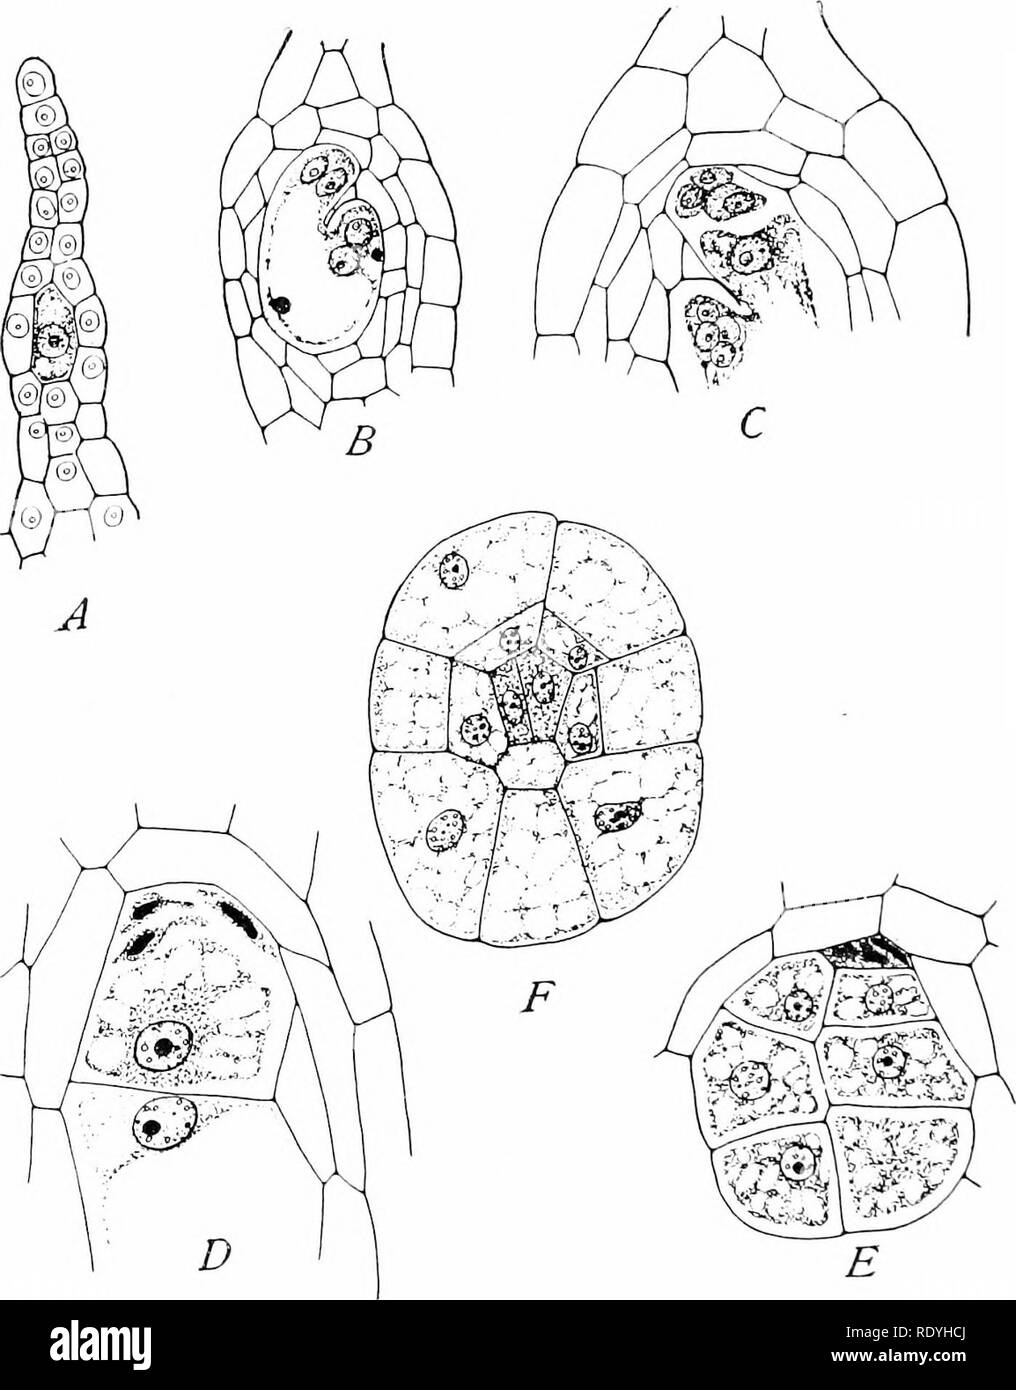 . Morphology of angiosperms (Morphology of spermatophytes. Part II). Angiosperms; Plant morphology. Fig. 107-—Balanophora elongata. Stages in development of embryo-sac, endosperm, and embryo. A, archegonium-like megasporangium with mother-cell that becomes megaspore directly without, forming tetrad; x 145; i?, quadrinucleate stage of embryo-sac; x 200; C, nearly mature sac showing above the two syuergids and oosphere, just beneath the micropylar polar nucleus, and at opposite end of sac a group of four nuclei, the three antipodals, and the lower polar nucleus; x '280; Z), at upper cud the syne Stock Photo